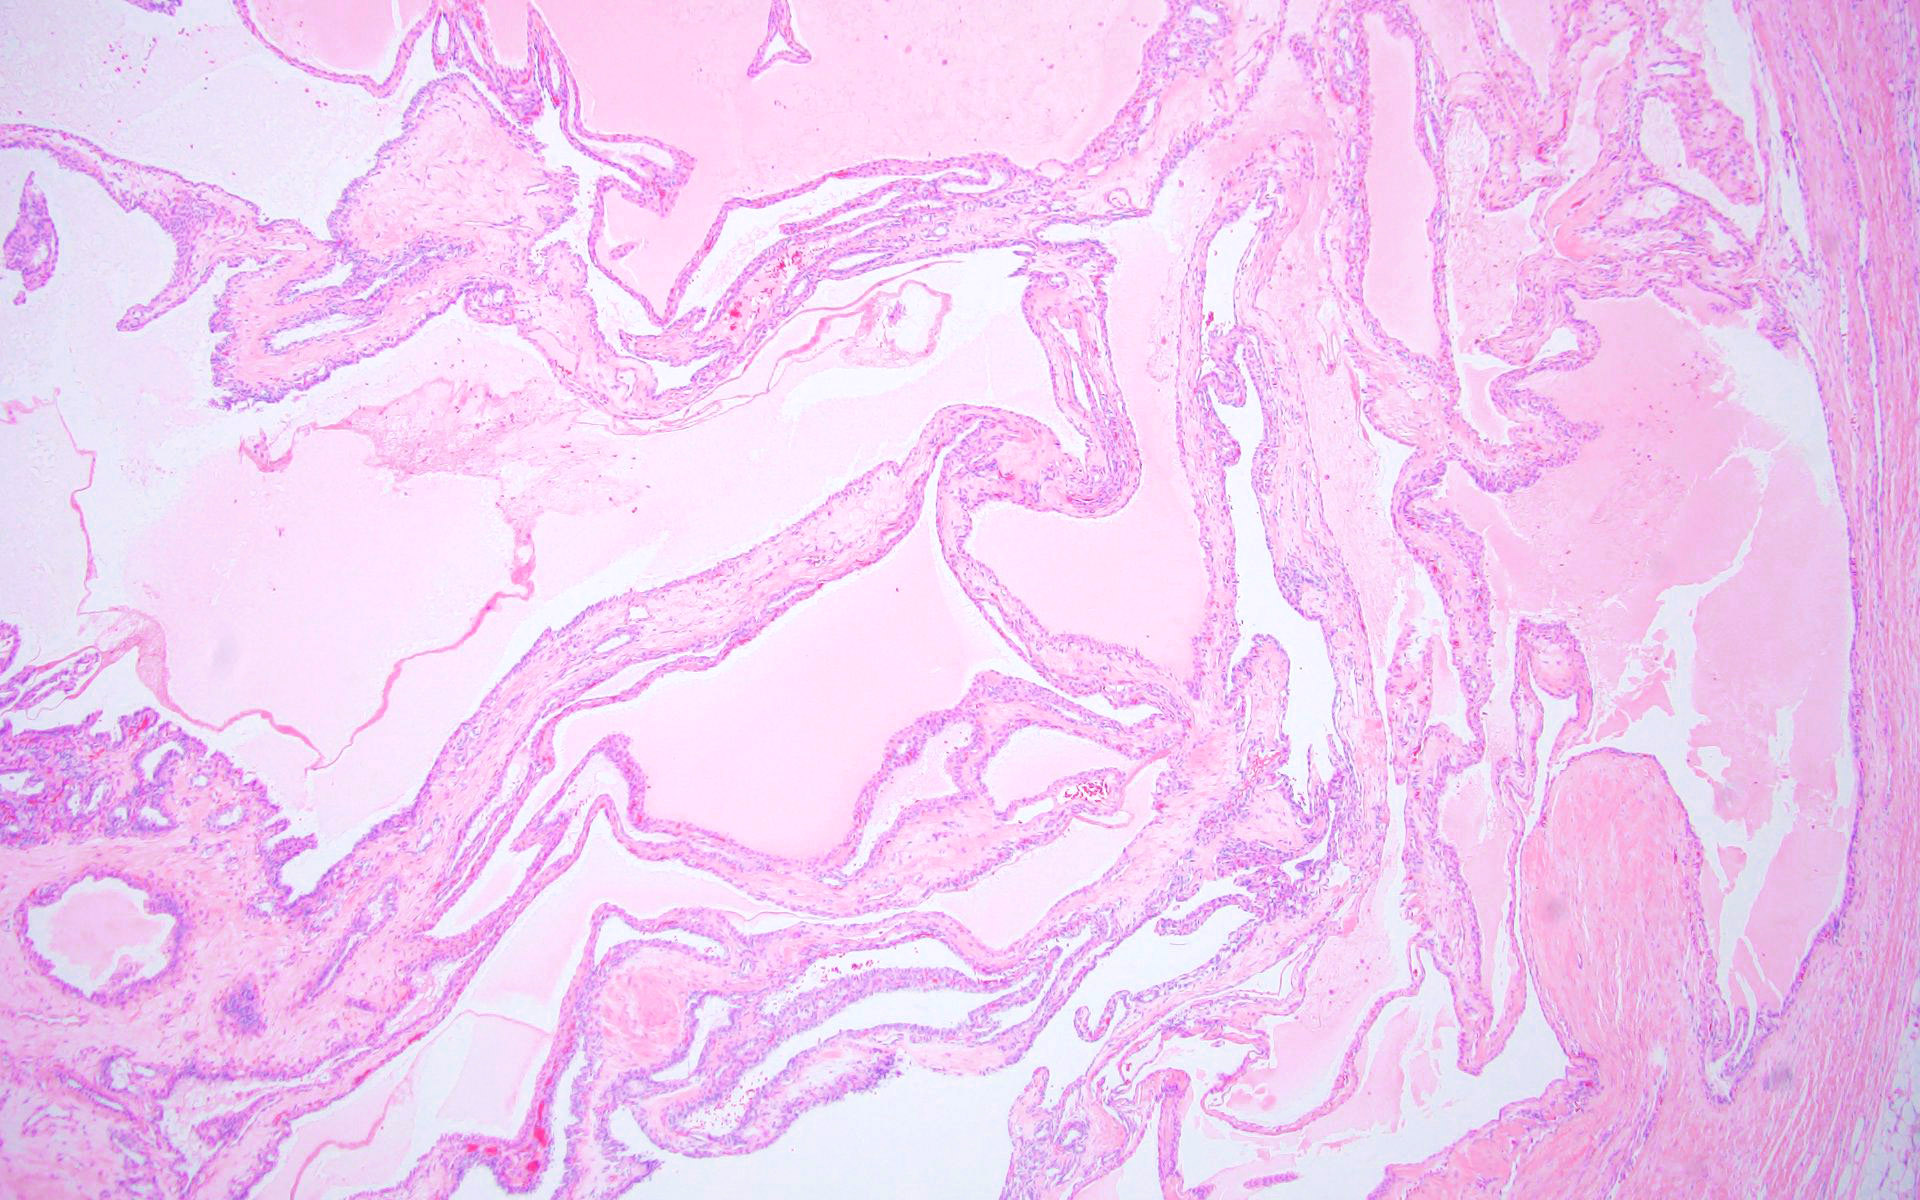 Variably sized cysts with low grade clear cell lining